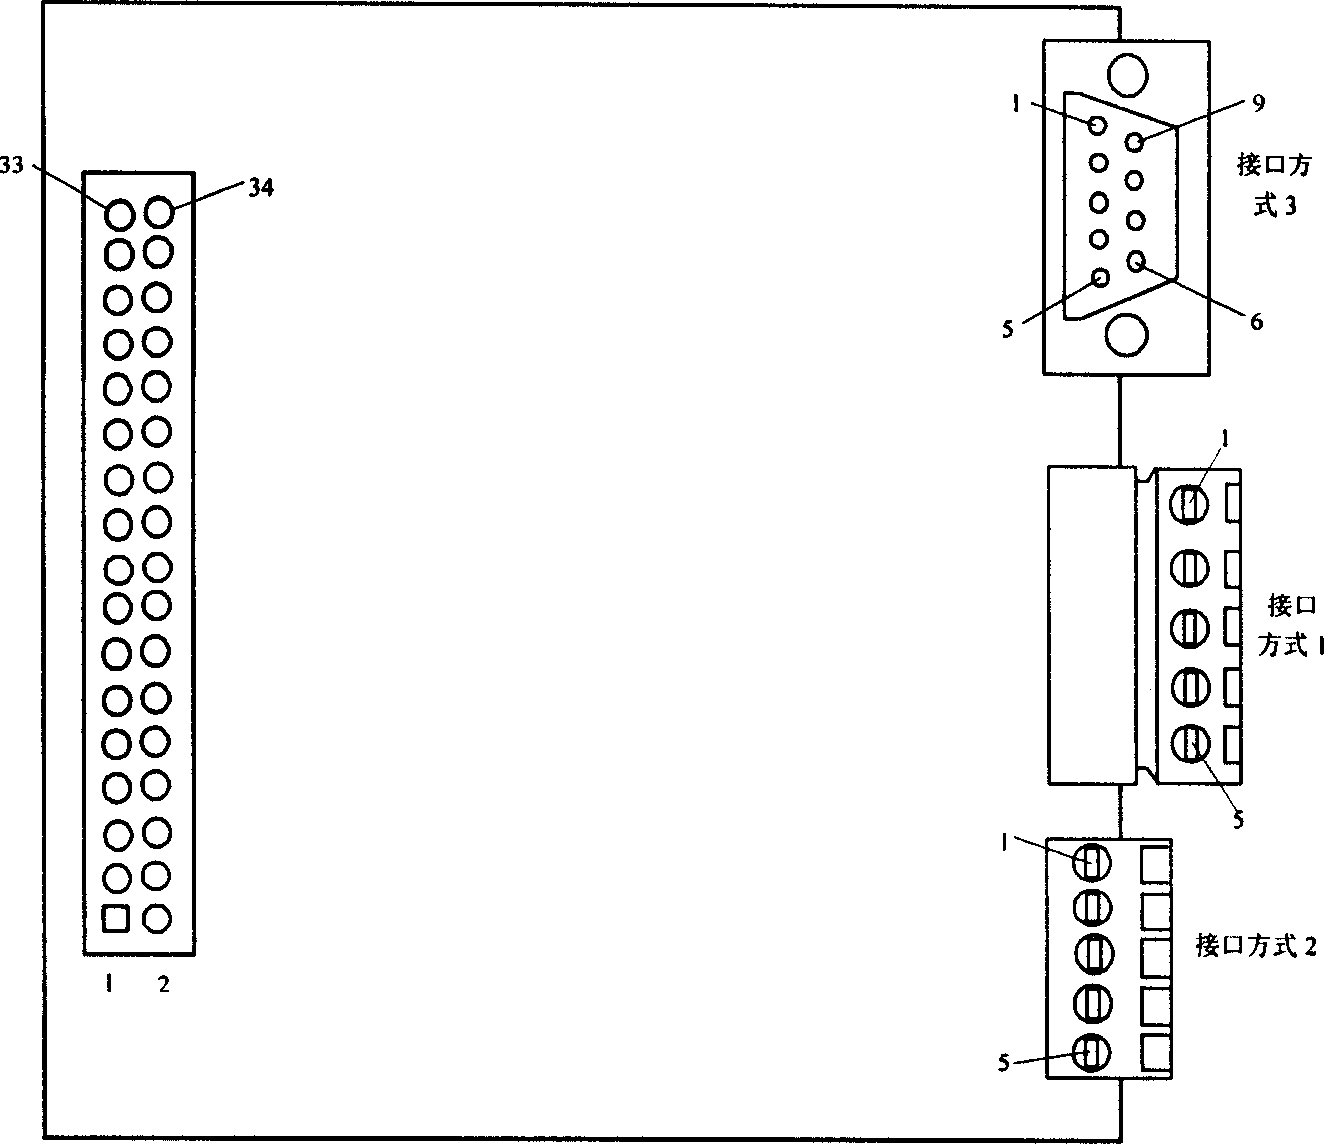 Embedded field bus protocol interface device and implementation method